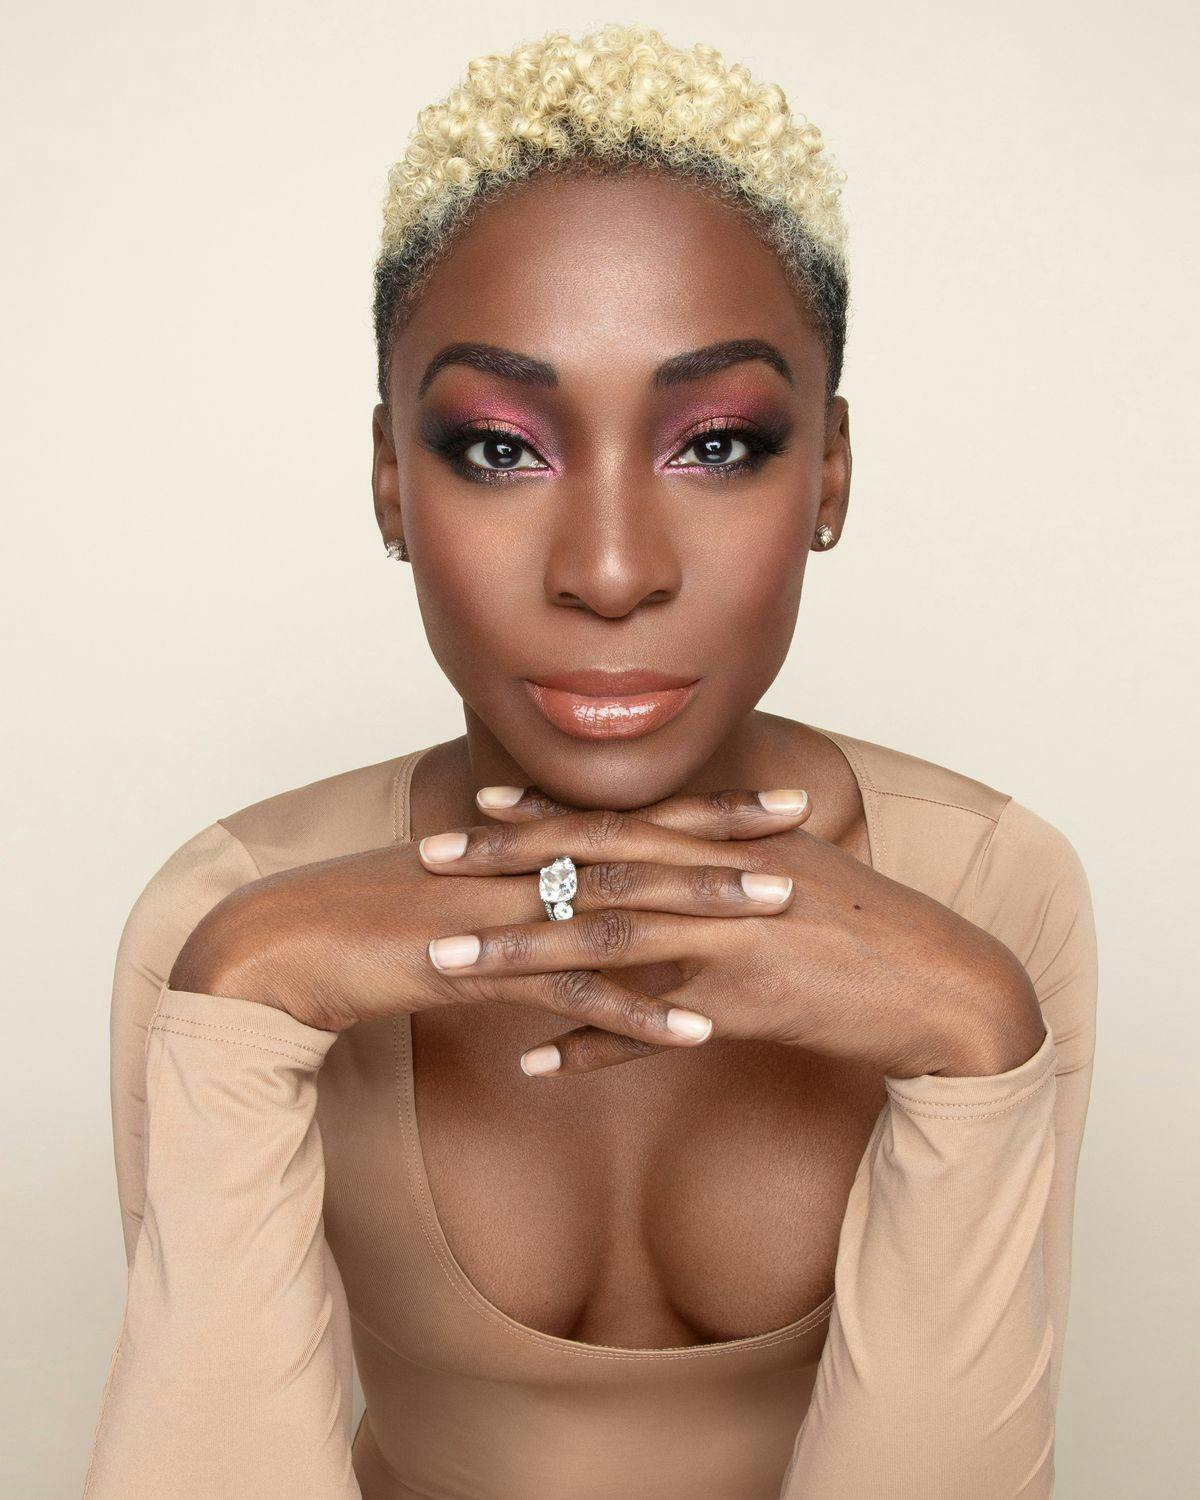 Angelica Ross is a dark-skinned Black woman with a blonde buzzcut with piercing eyes and a soft smile